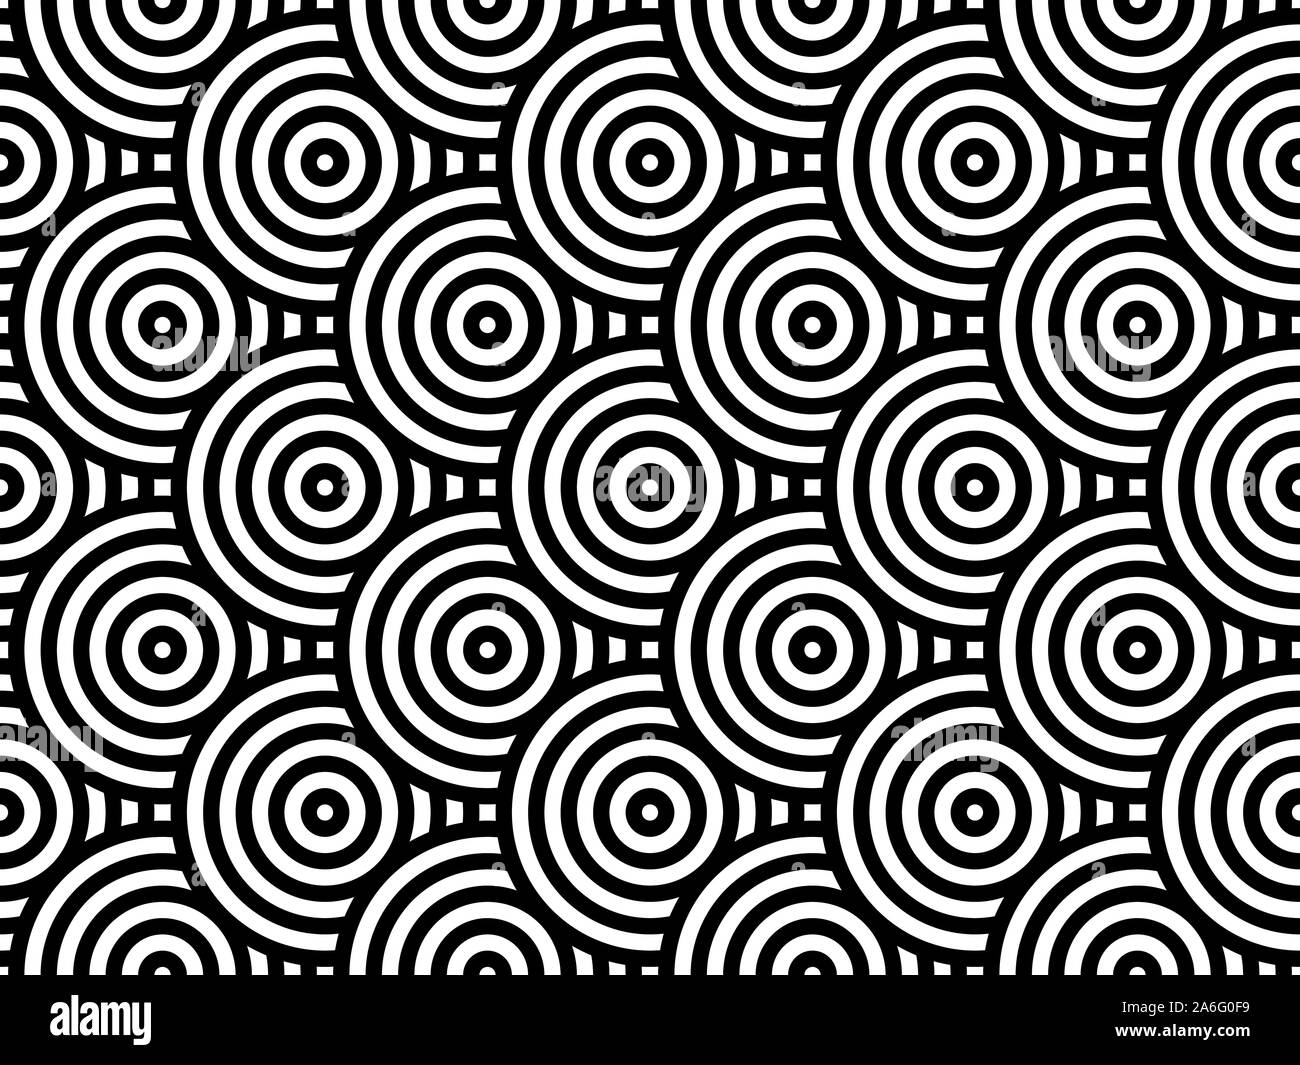 Black and white overlapping repeating circles background. Japanese style circles seamless pattern. Endless repeated texture. Modern spiral . Vector Stock Vector